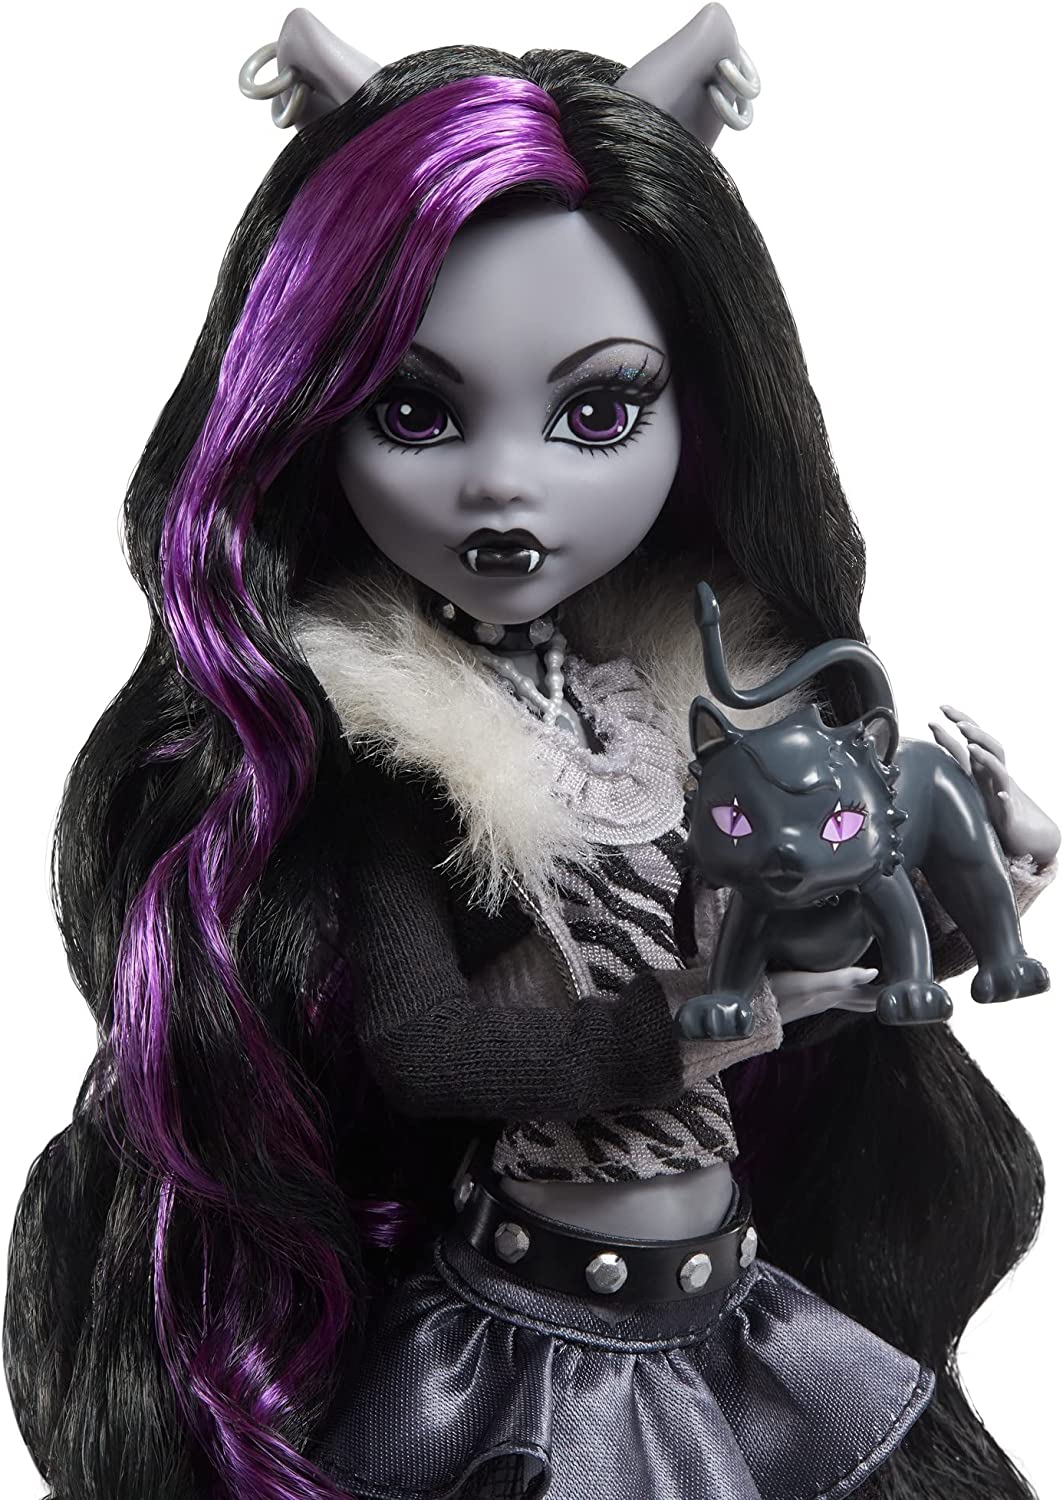 ** IN HAND** Monster High Reel Drama Clawdeen Wolf Doll BRAND NEW SHIPS ASAP